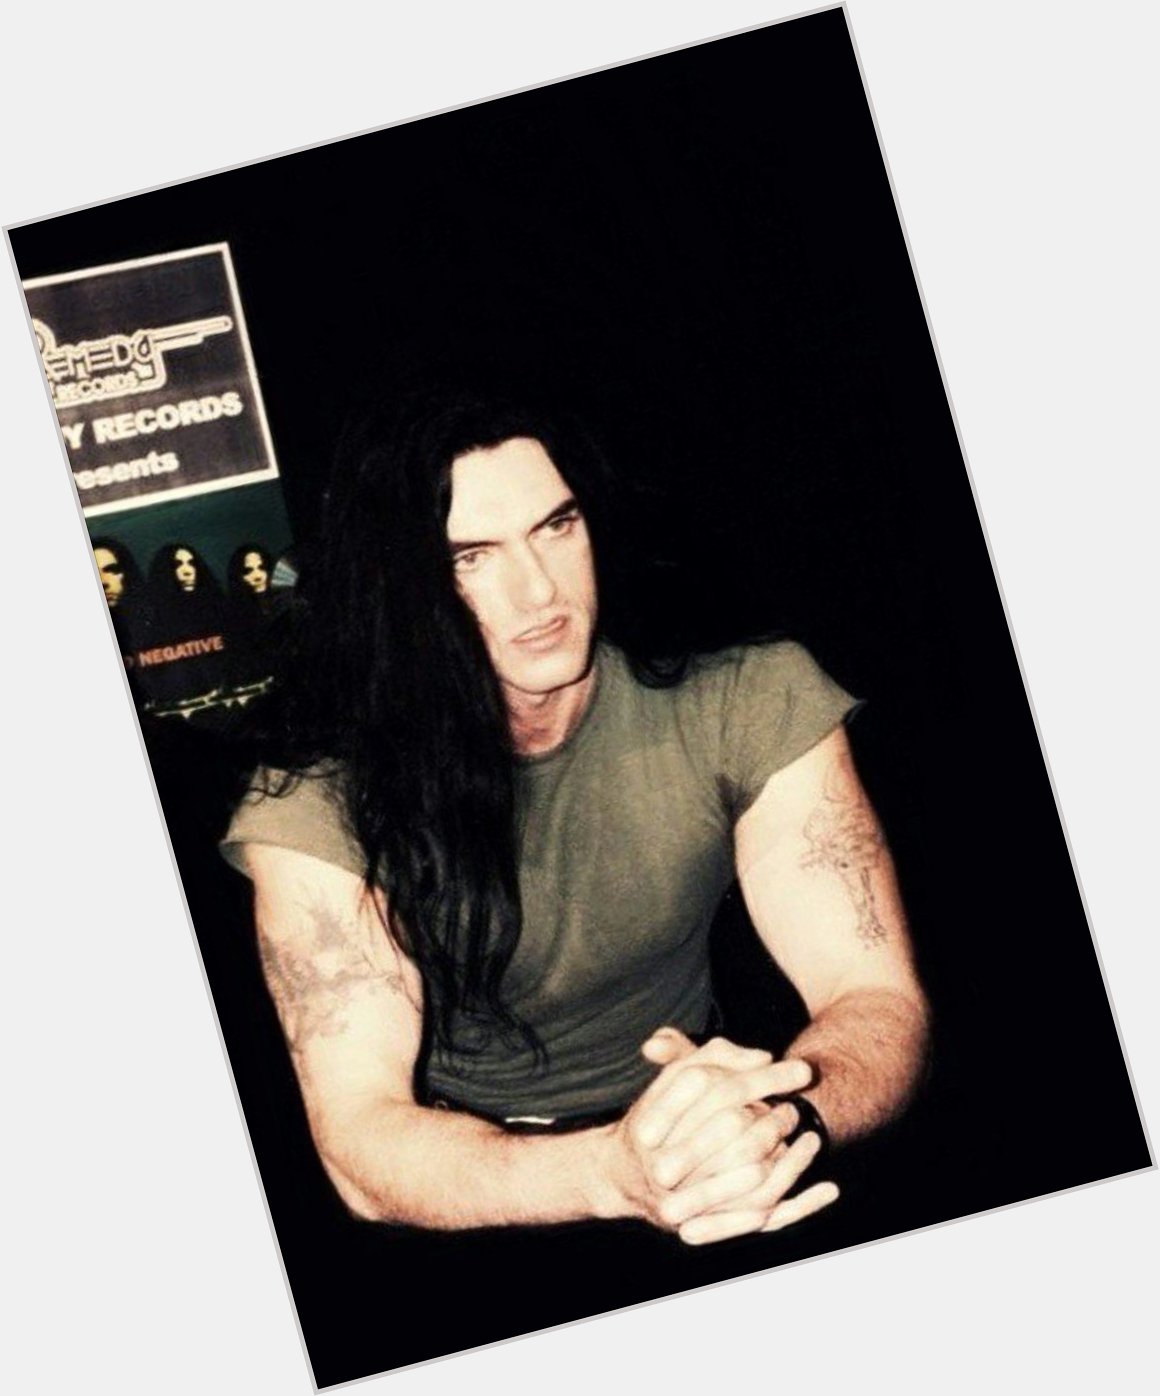 Happy birthday to the one and only Peter Steele. I miss you, Green Man  